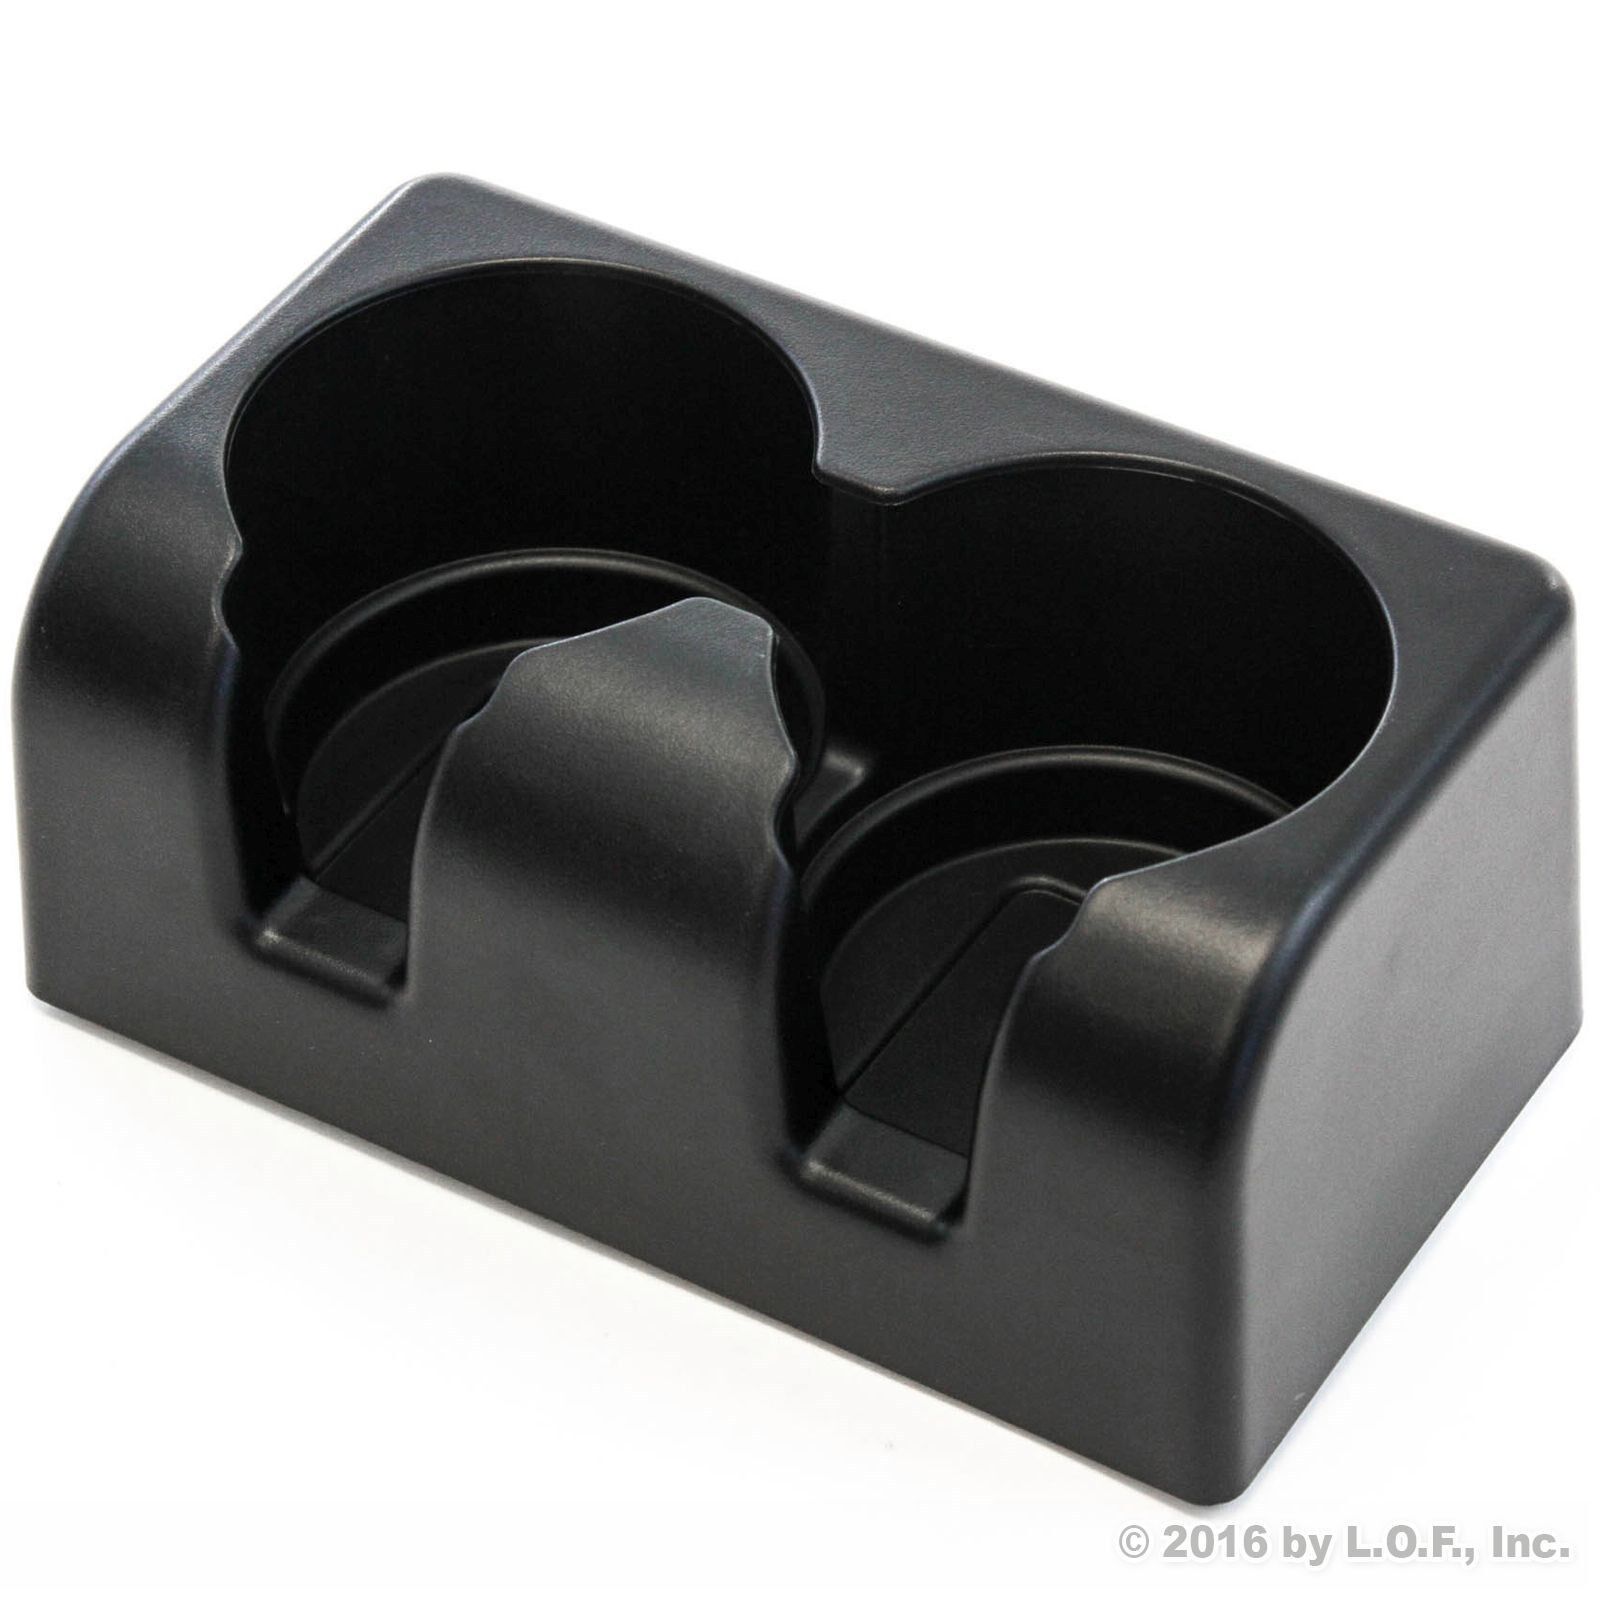 2004-12 fits Colorado Canyon Bench Seat Cup Holder Insert Drink Replacement New